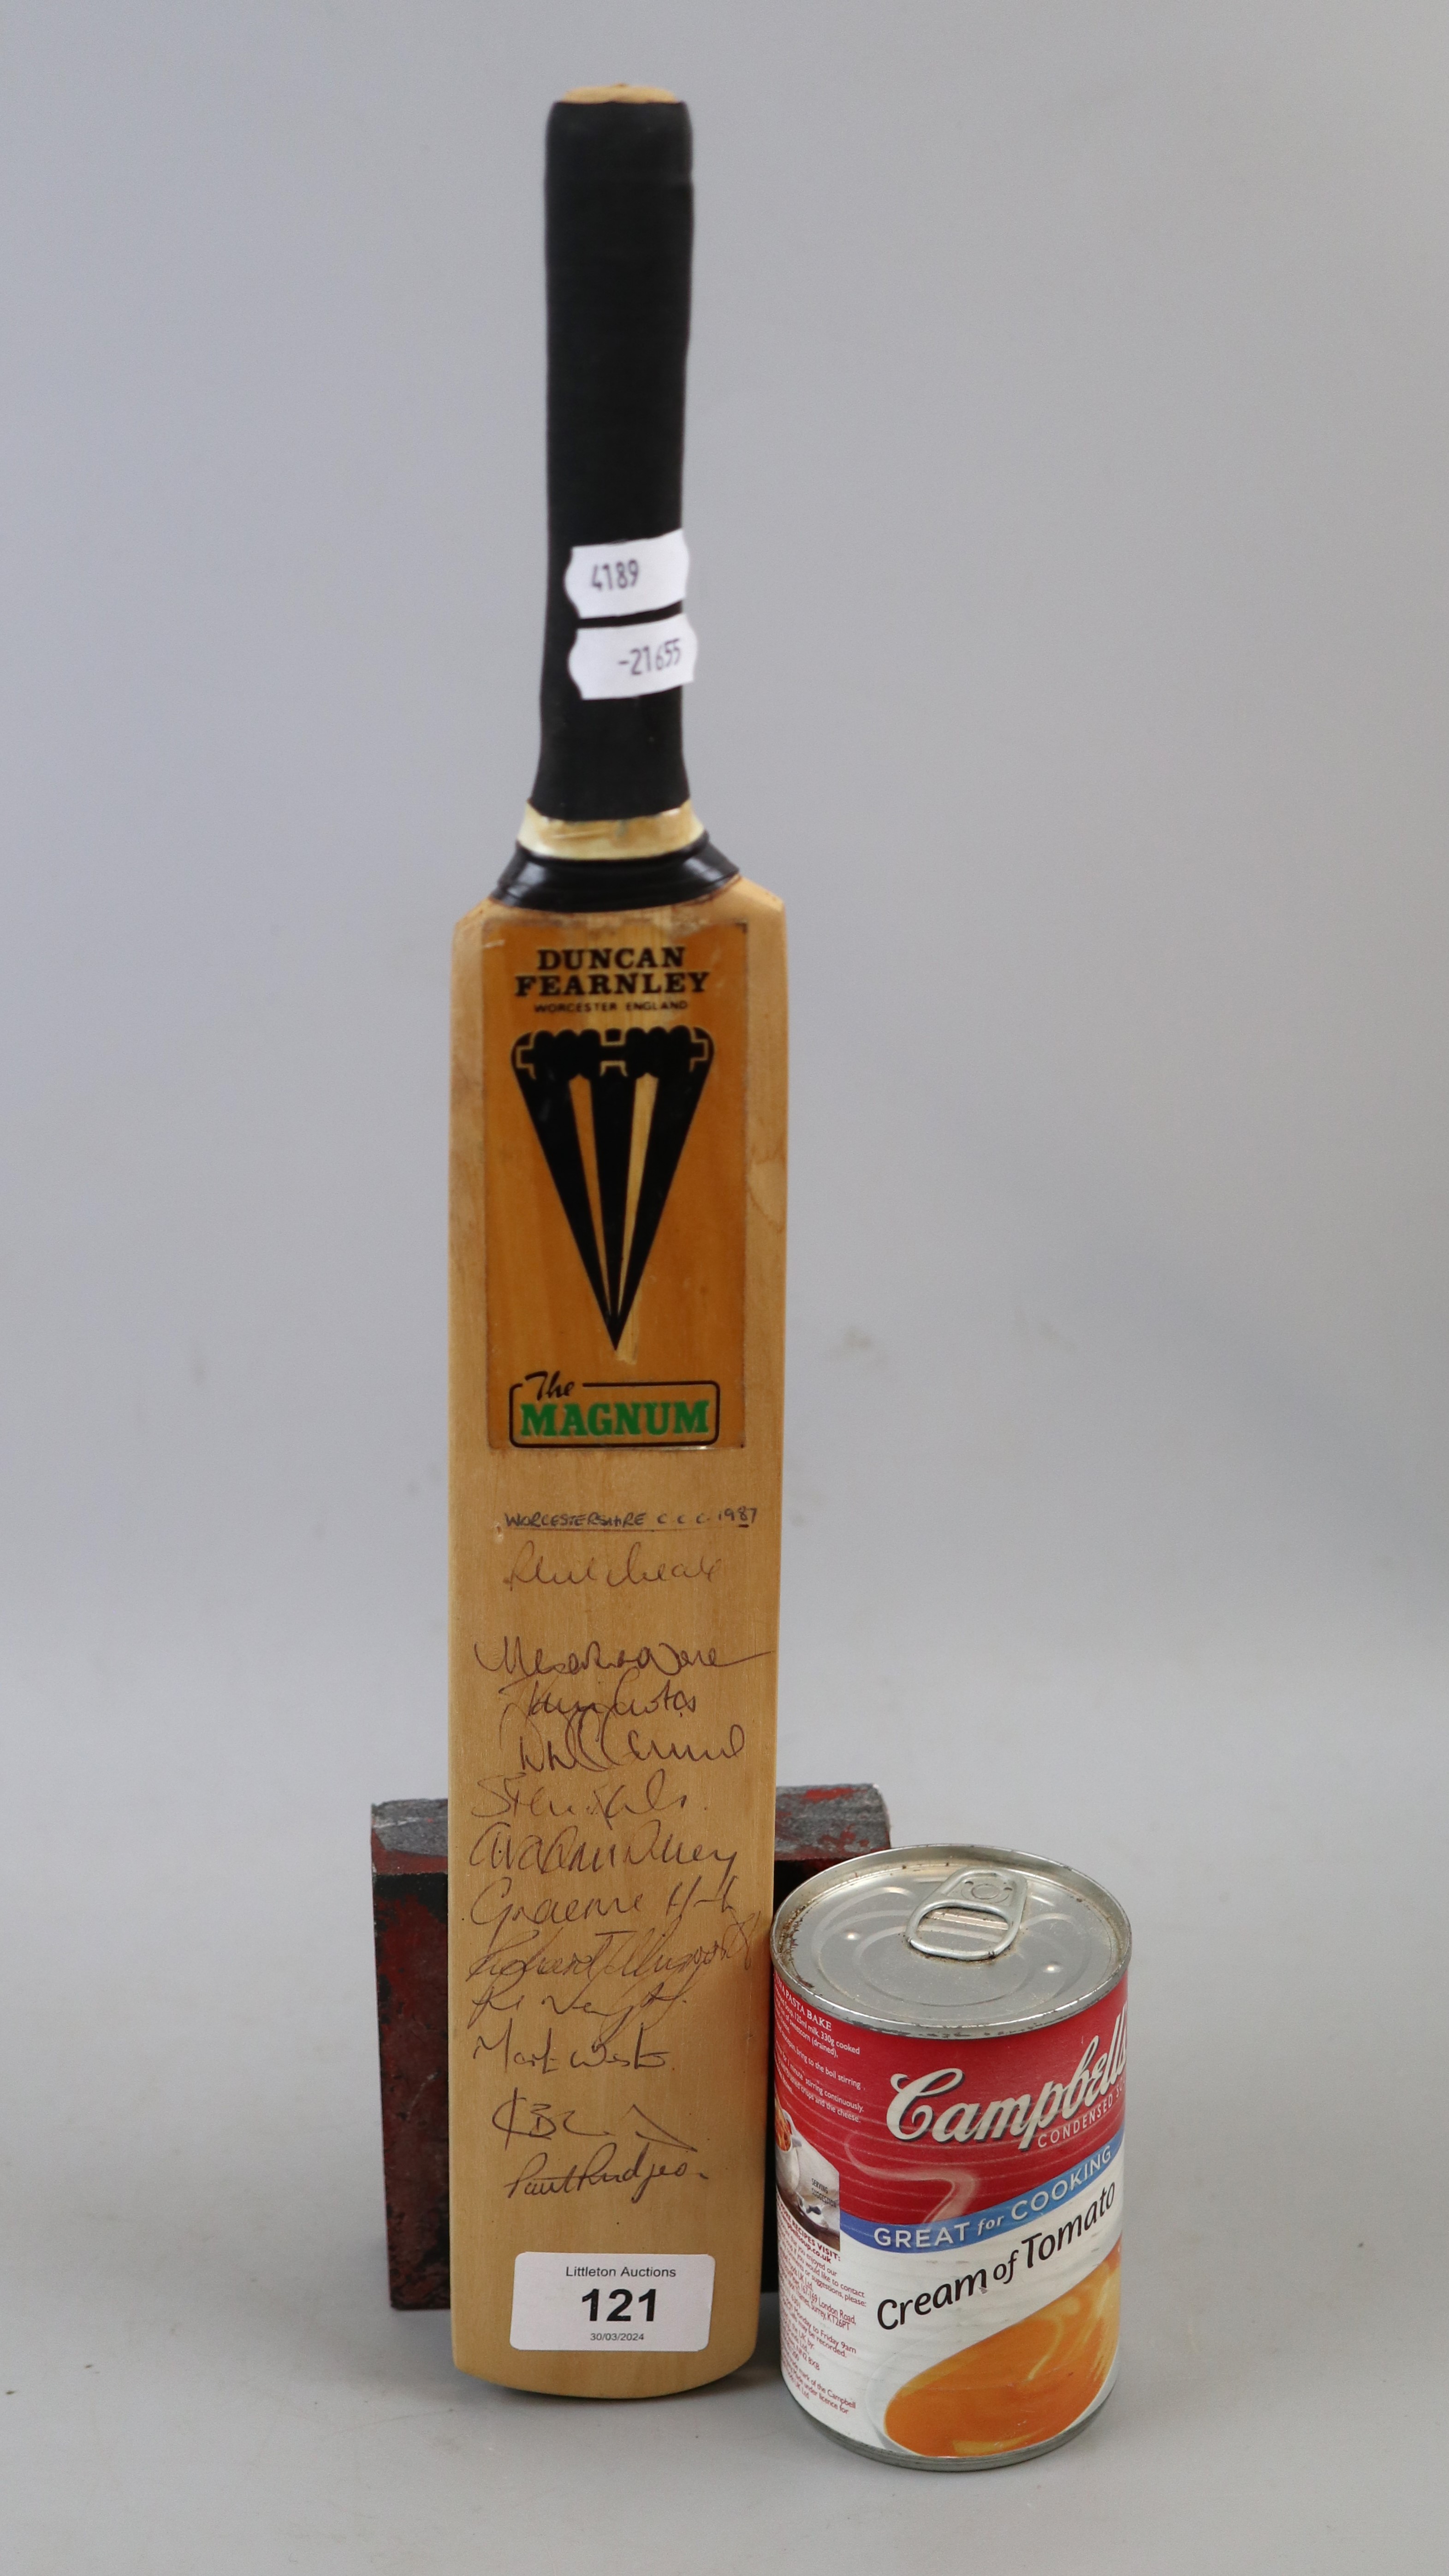 Signed miniature cricket bat by Worcestershire team 1987 - Image 2 of 3